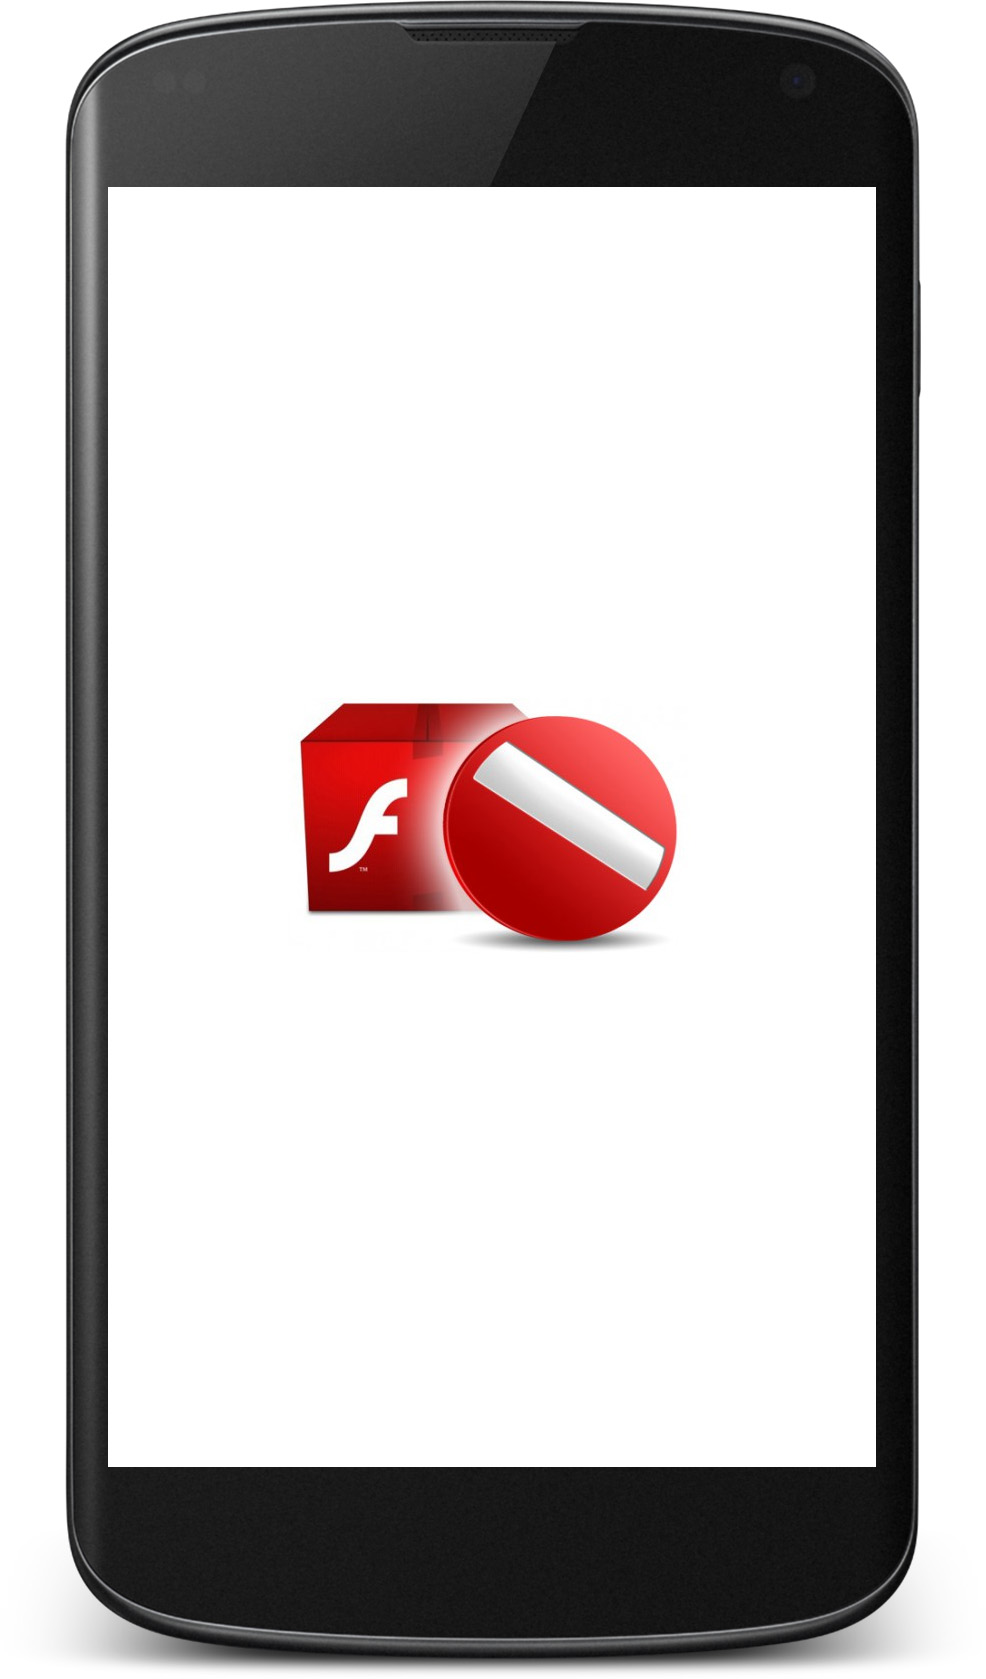 adobe flash player free download for xp latest version